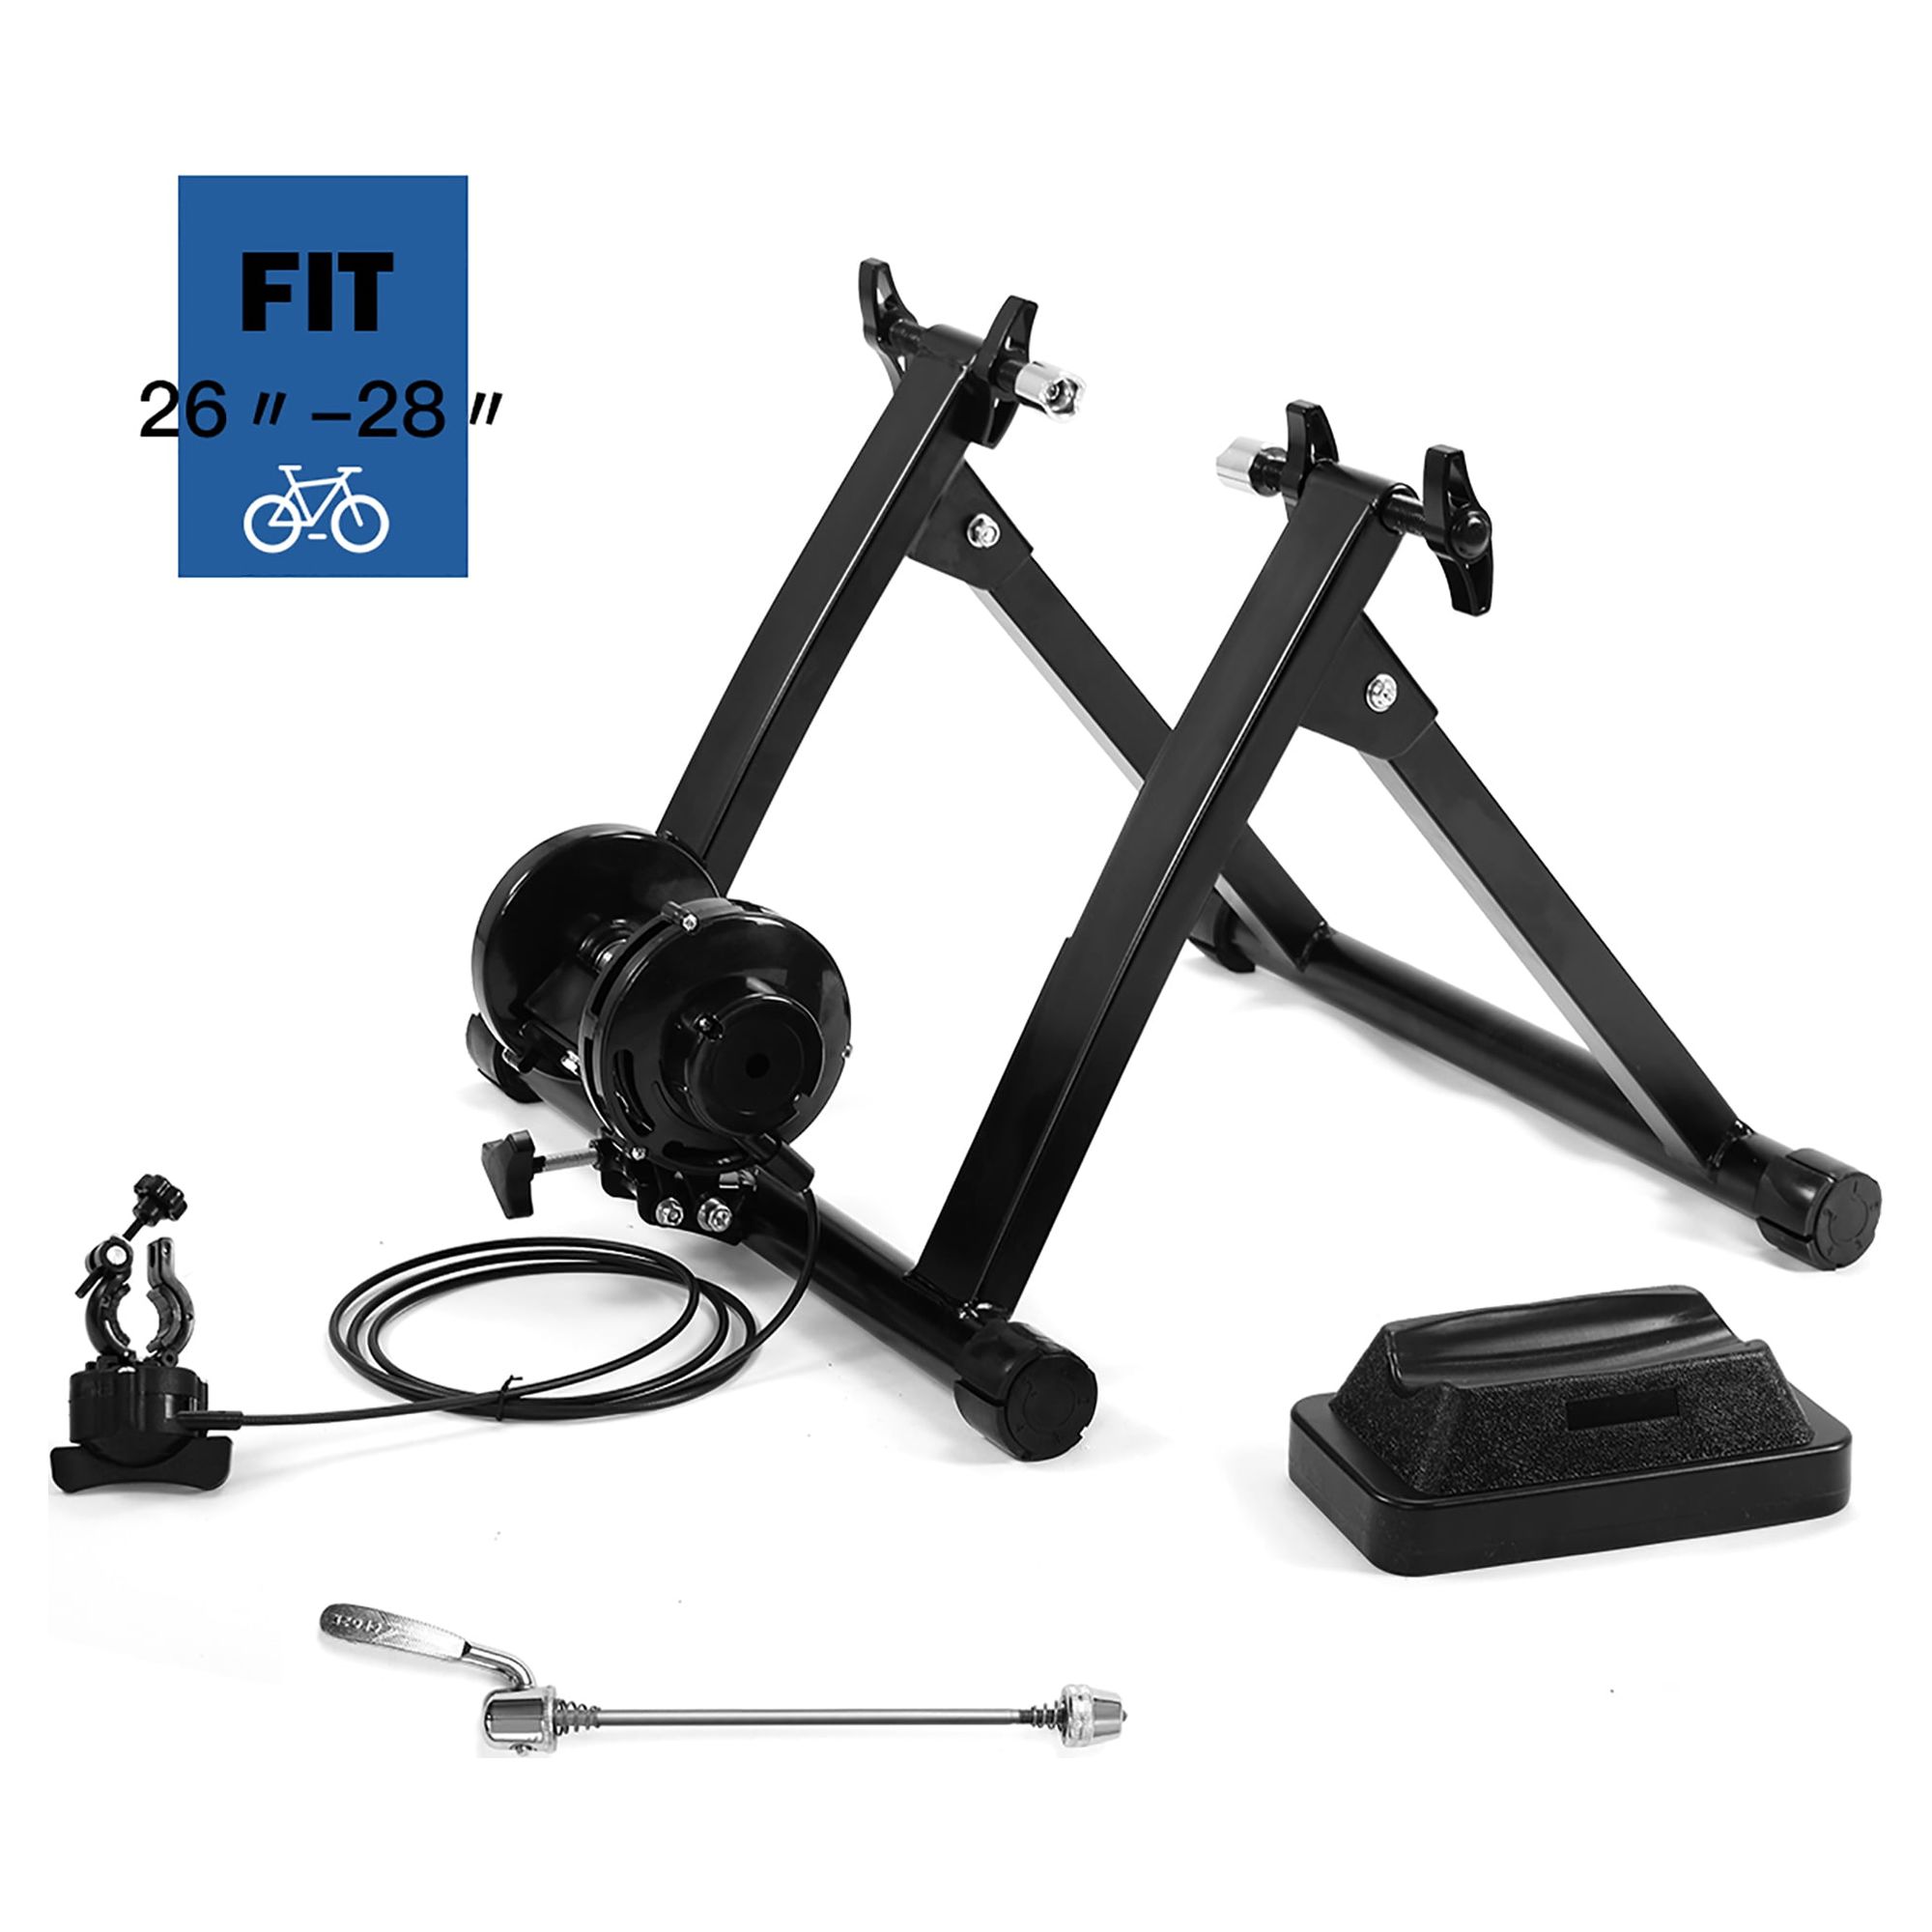 Costway Magnetic Indoor Bicycle Bike Trainer Exercise Stand 8 Levels of Resistance - image 1 of 8